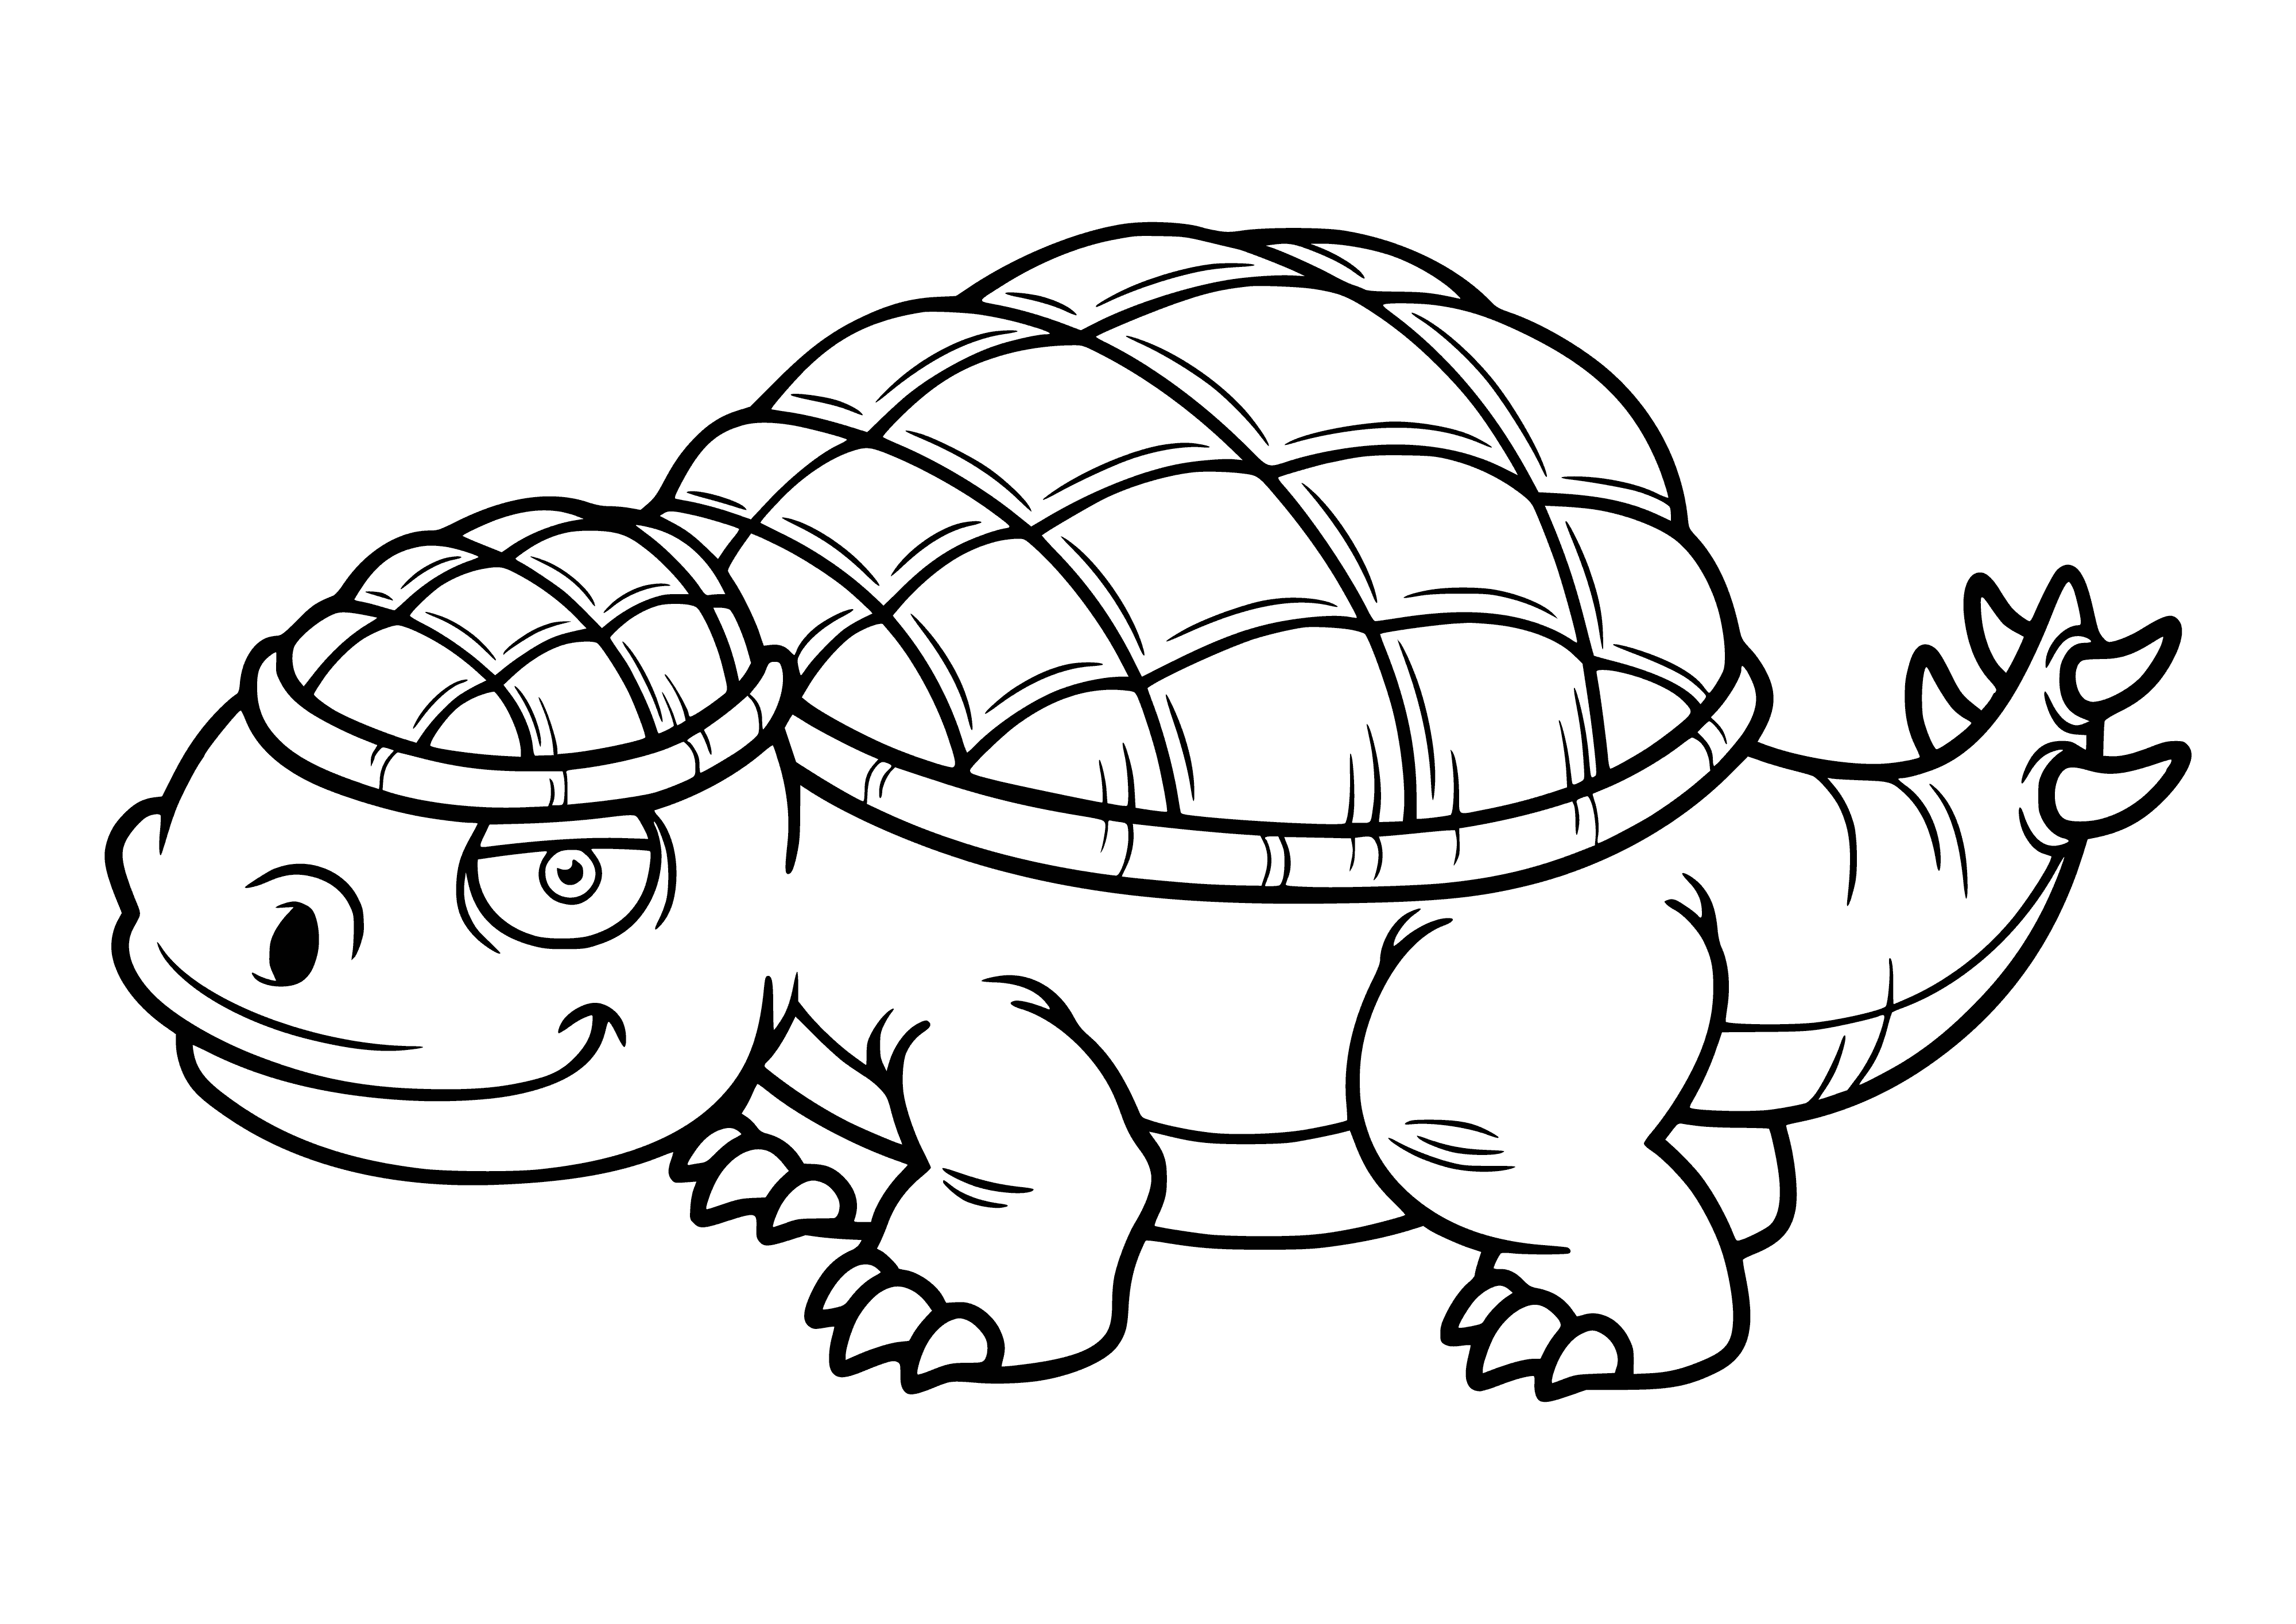 coloring page: Dino with long tail, small head and spikes stands on four legs in coloring page.